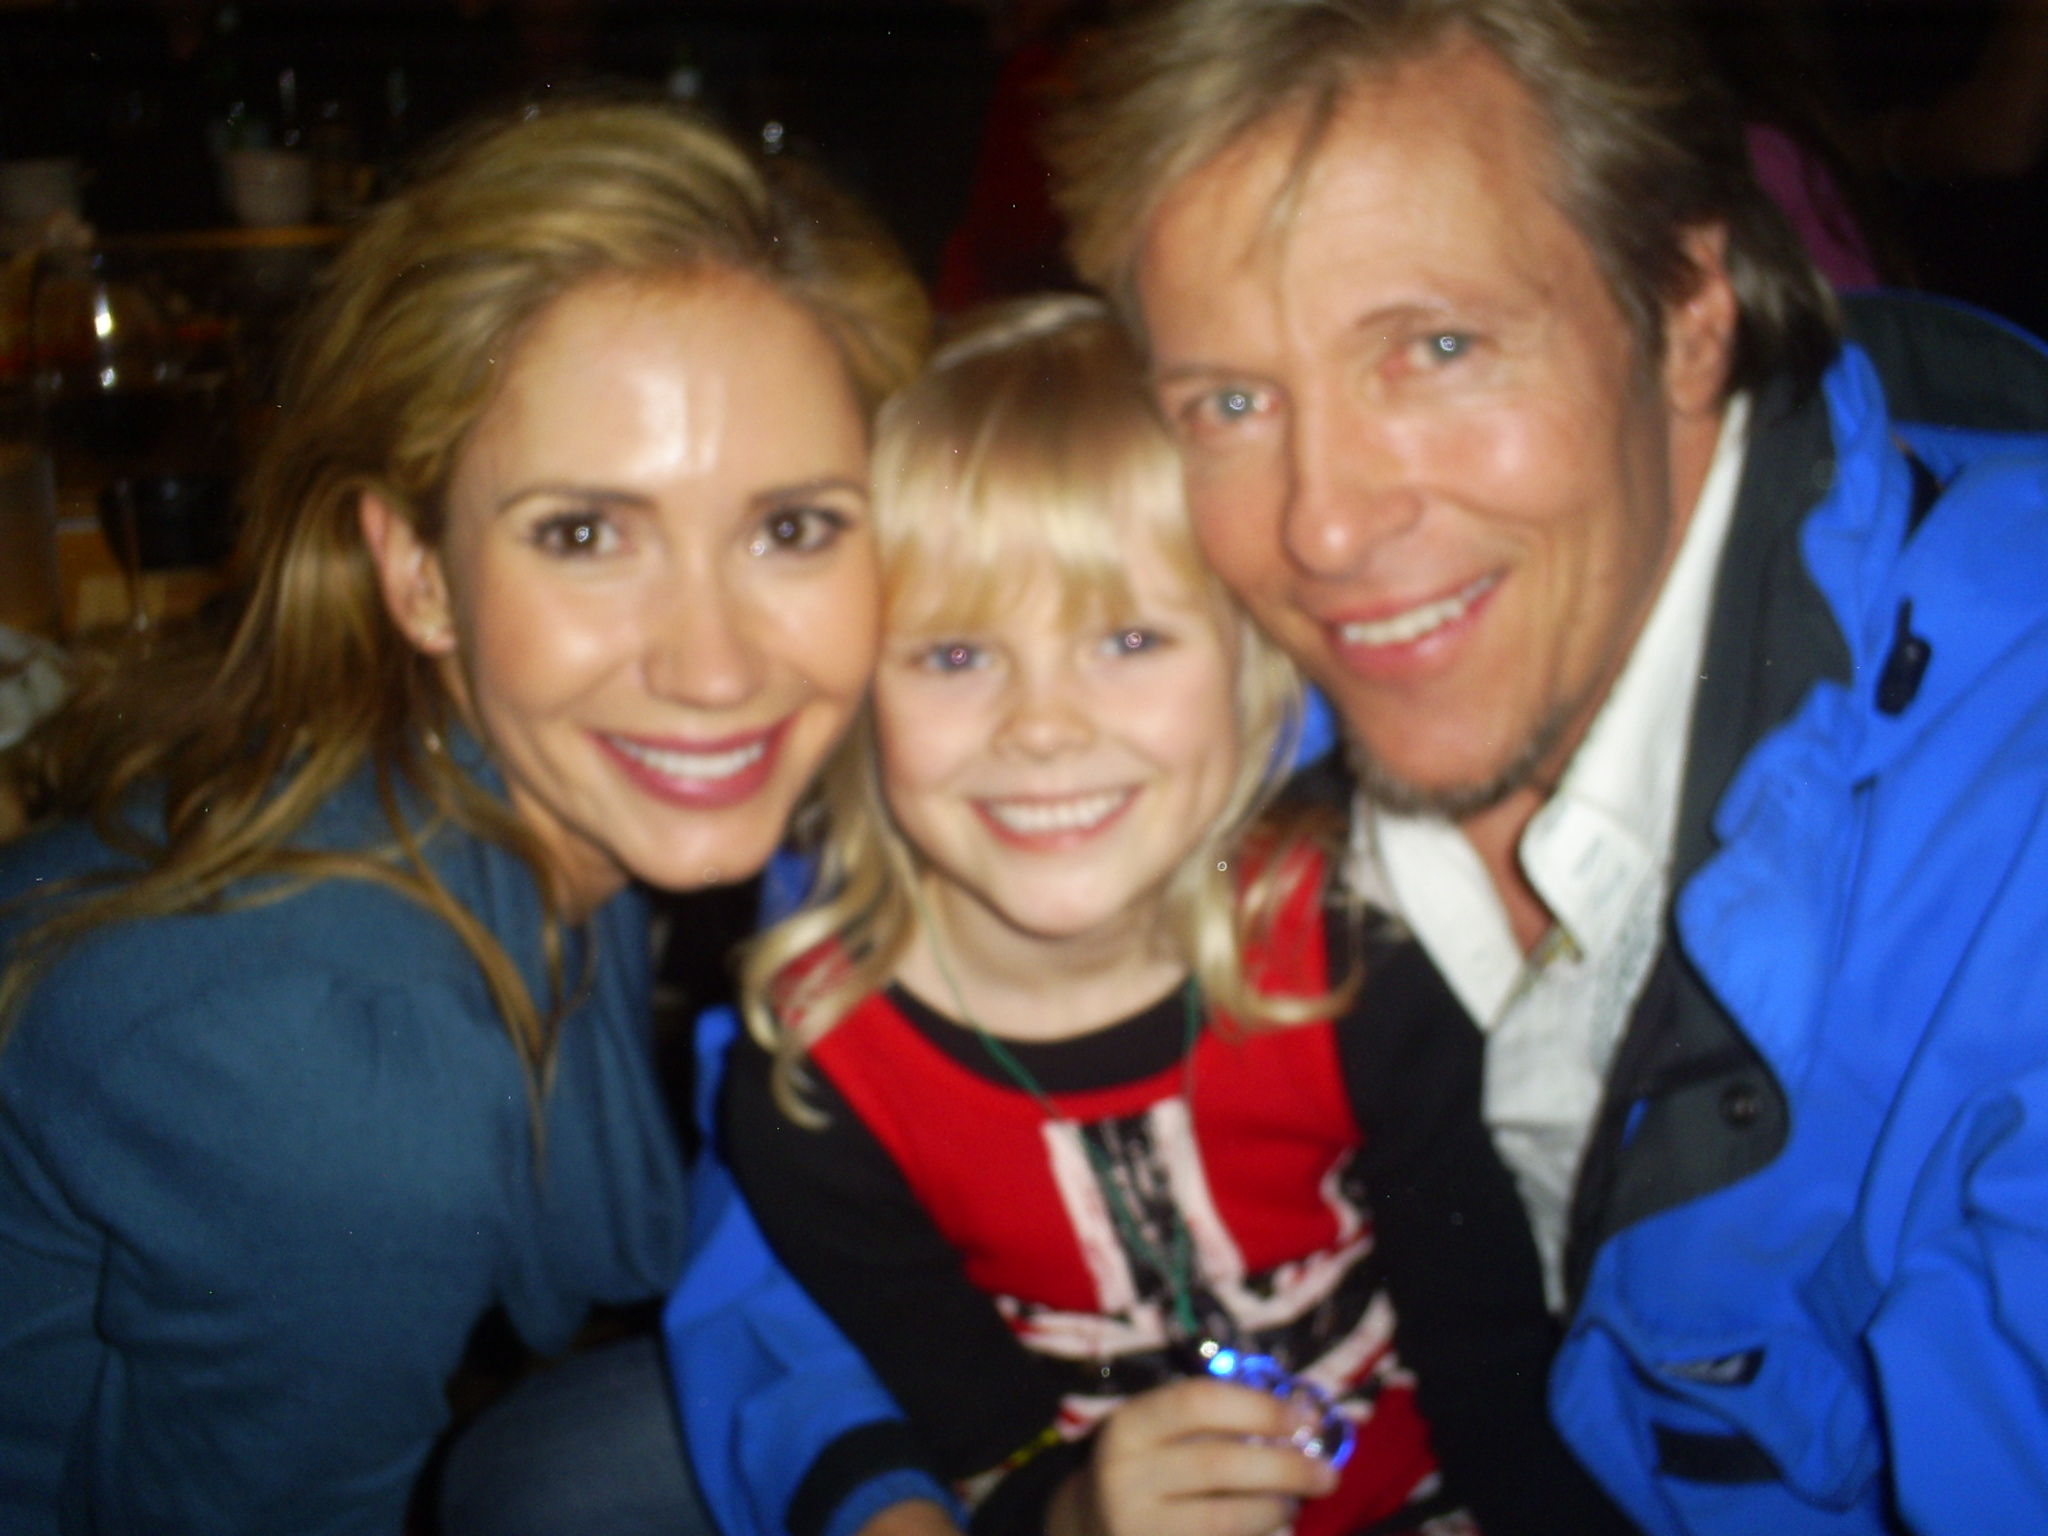 Harley, Jack Wagner and Ashley Jones at The Bold and The Beautiful's 2008 Christmas Party.